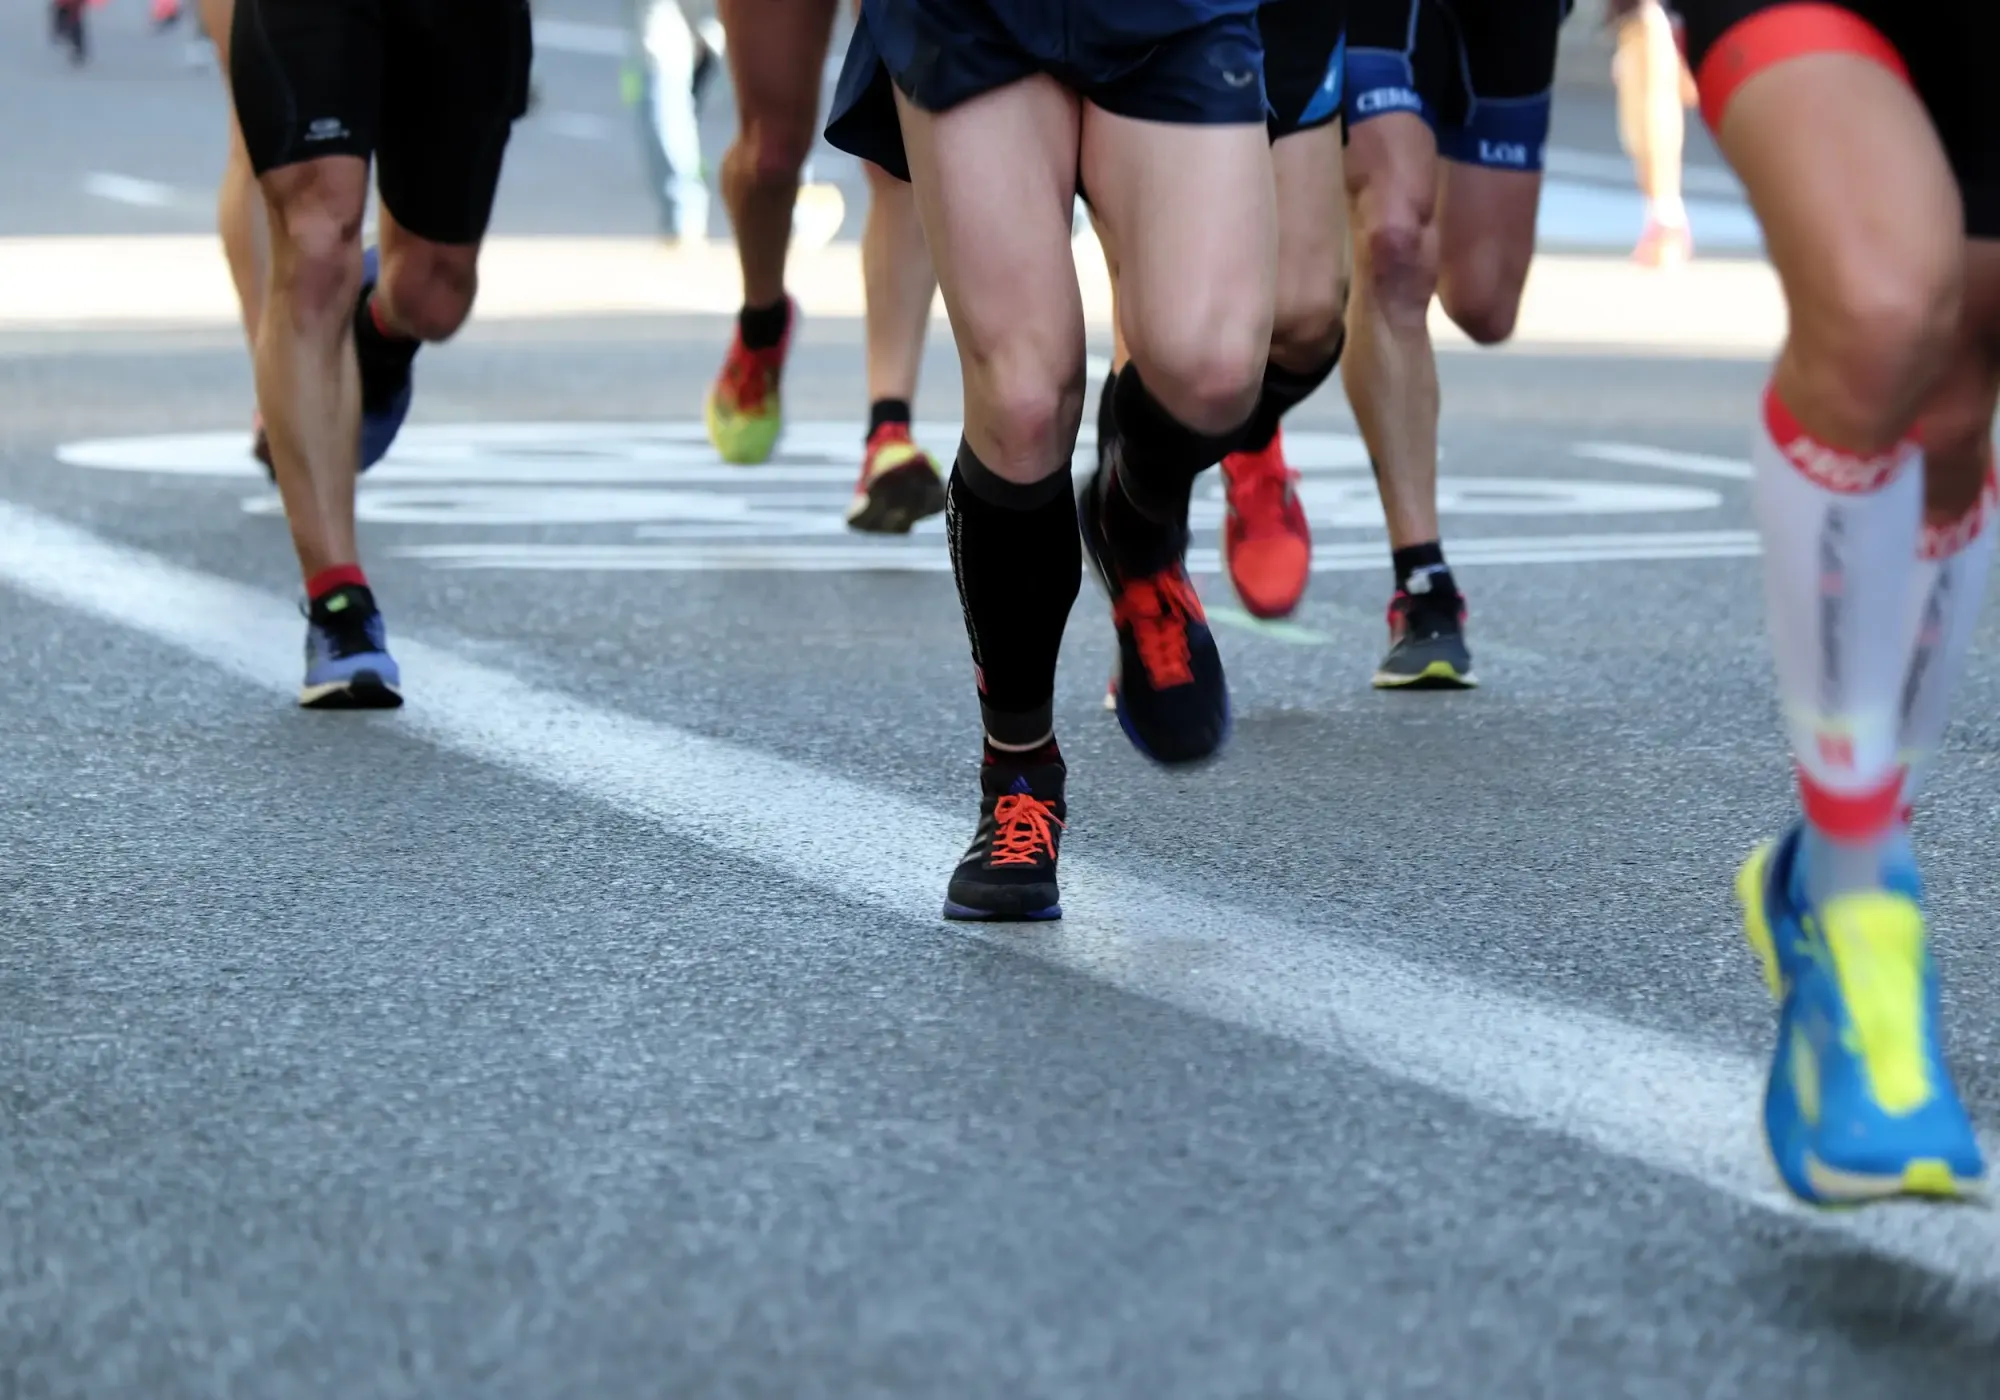 Runners' legs during a road running race.